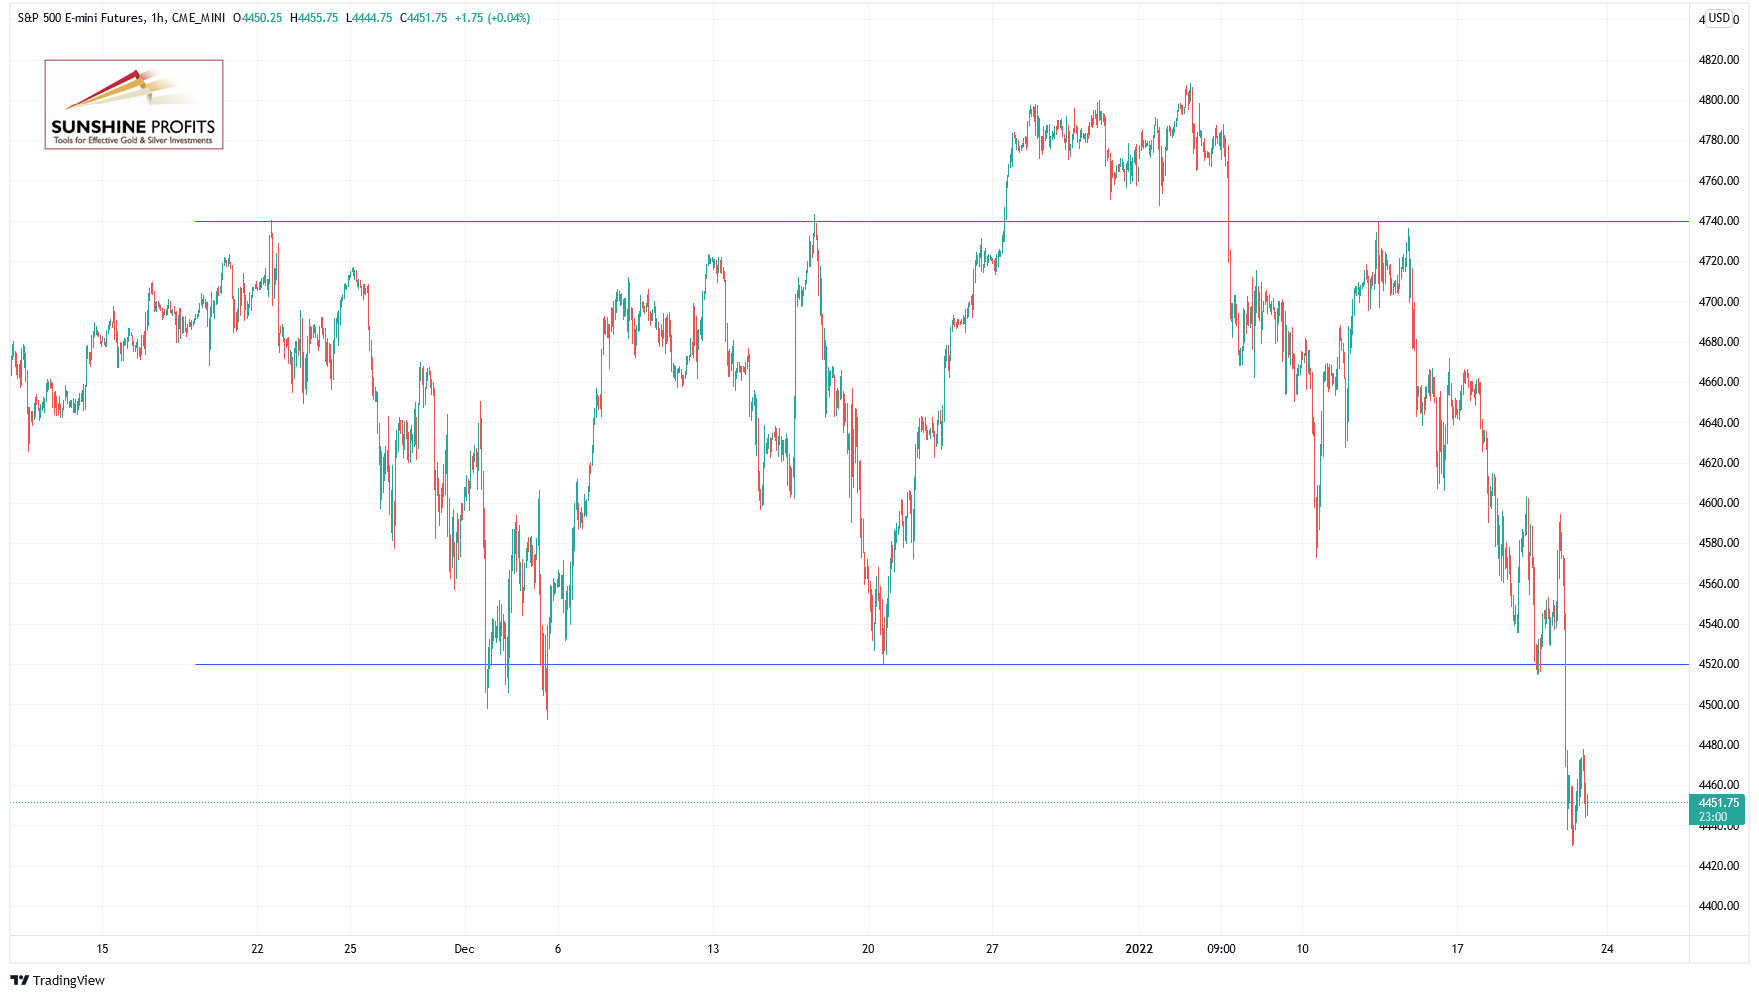 S&P 500 Futures Hourly Chart.